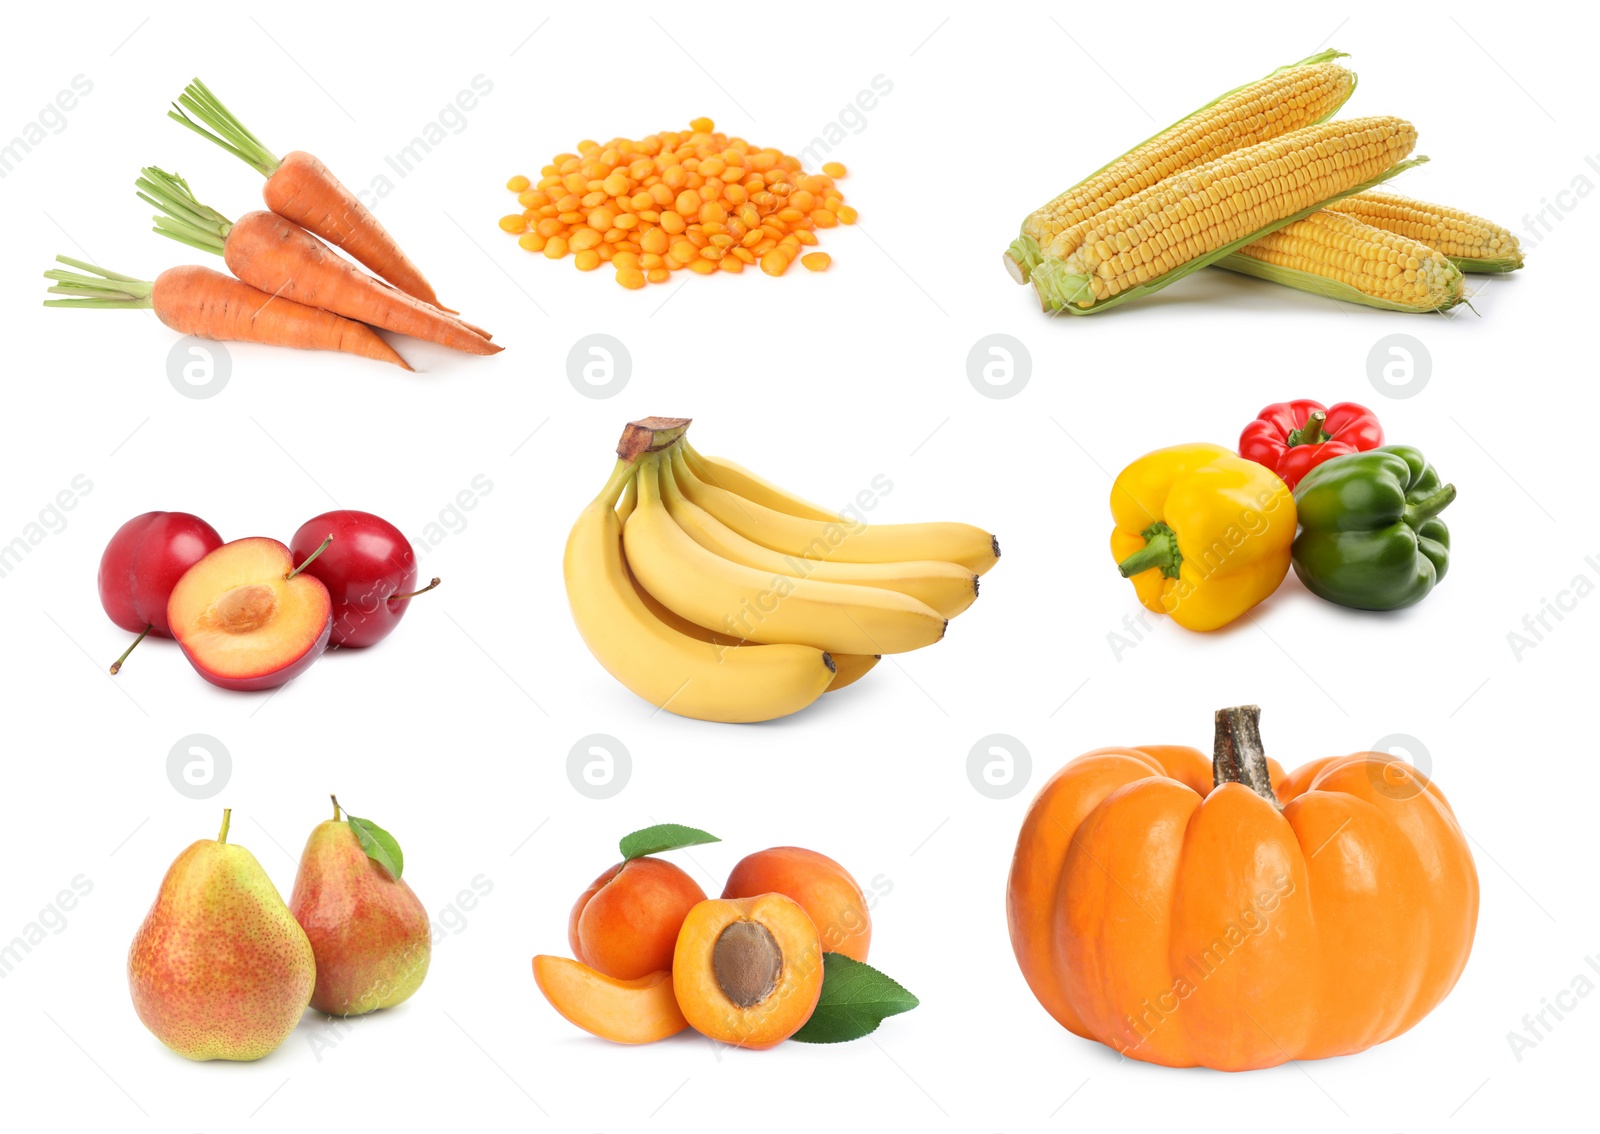 Image of Set with many different fruits, vegetables and pile of lentils on white background